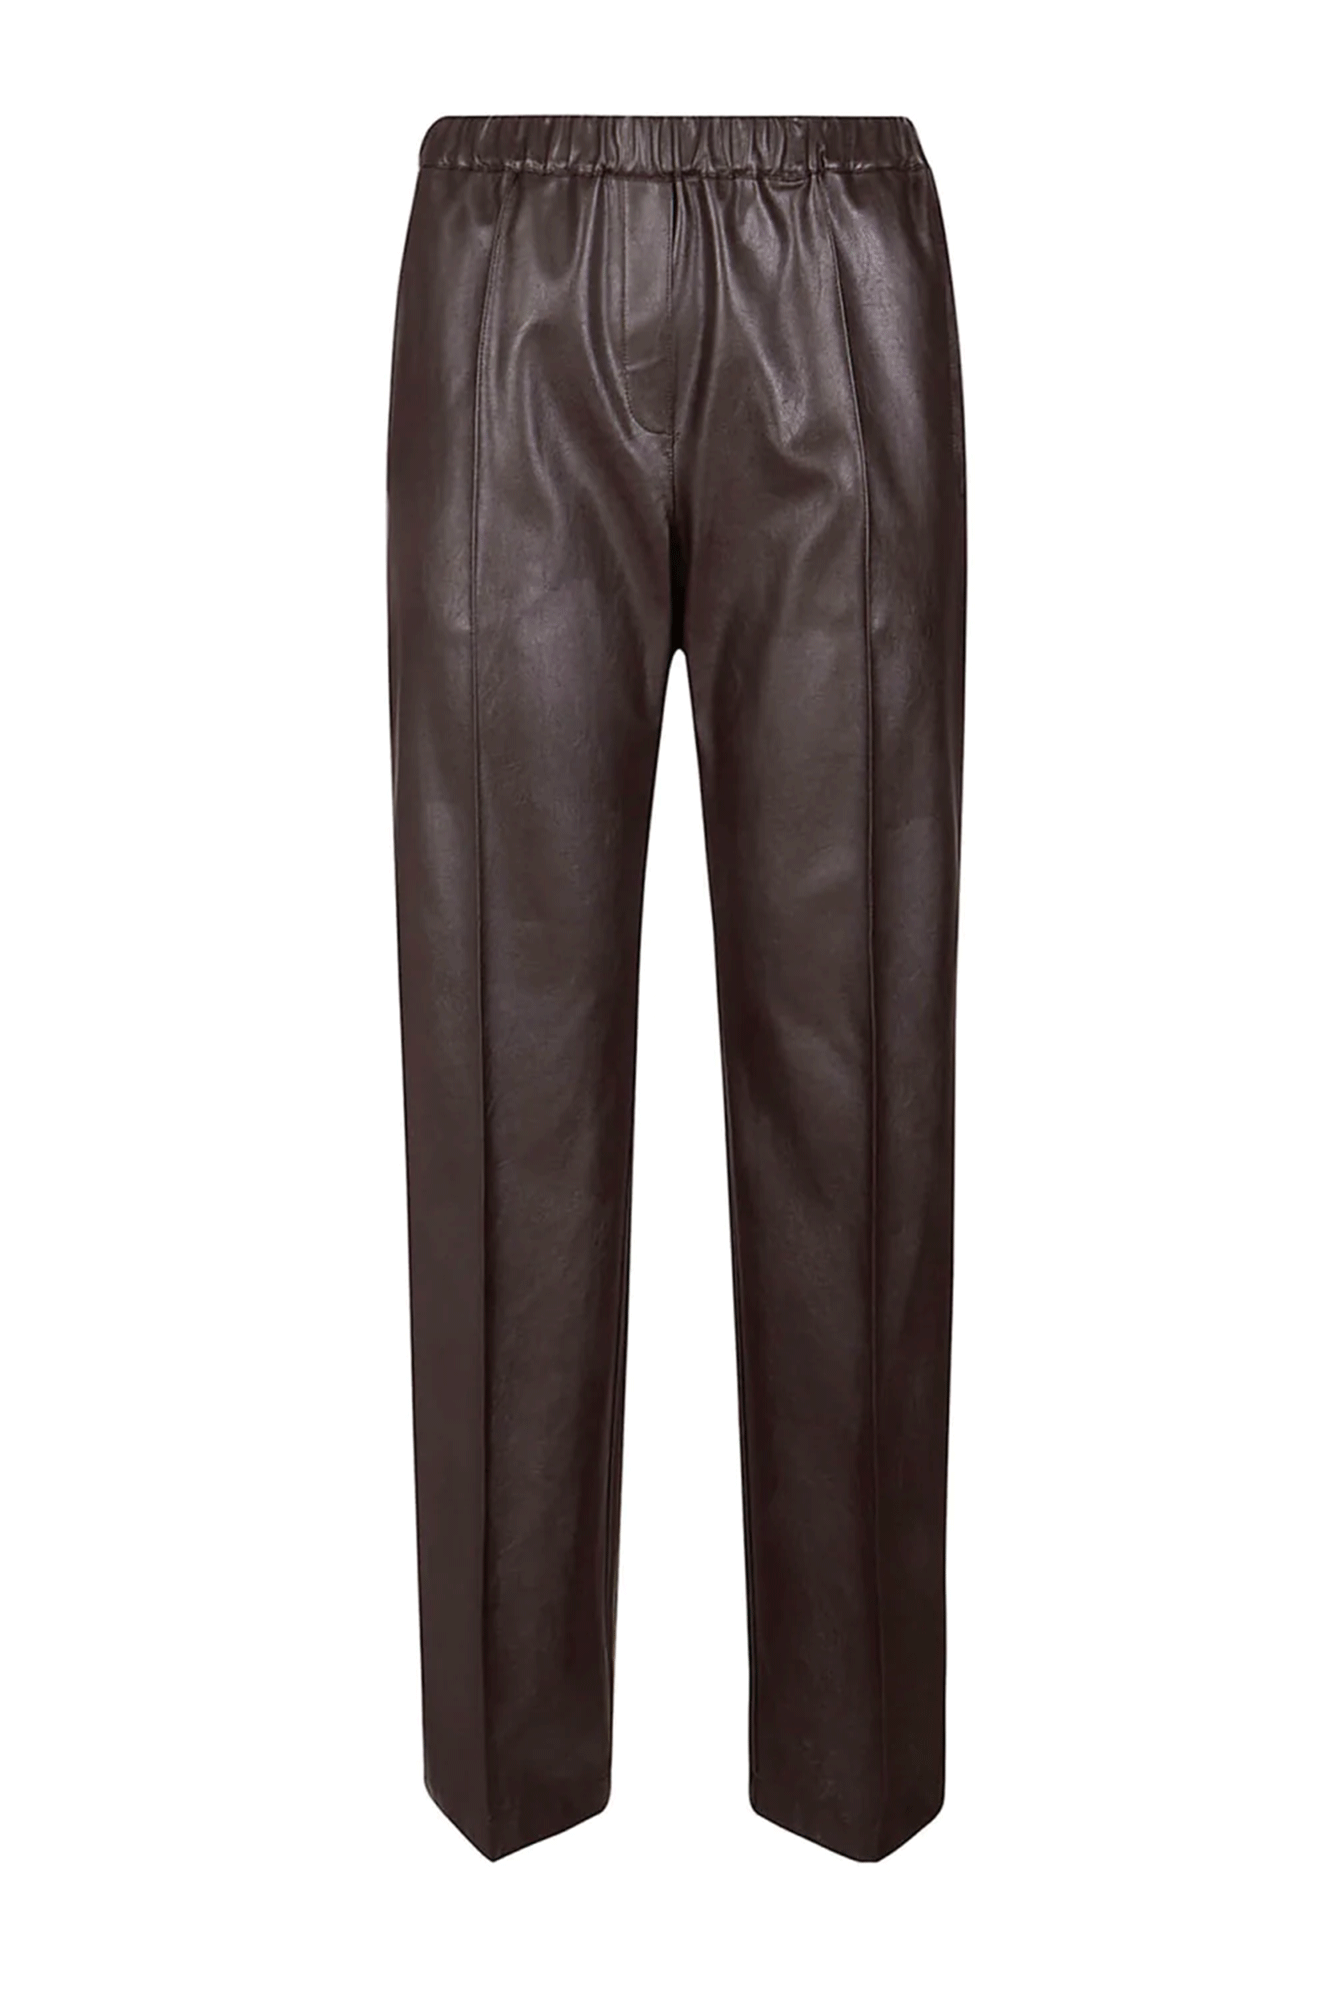 Our Wide Leg Trousers from Purotatto are crafted with top-of-the-line materials, resulting in a garment that's both comfortable and trendy. These trousers provide a wide-legged fit perfect for all occasions, giving you ample freedom of movement and an elegant flair. Treat yourself to the utmost in style and quality.